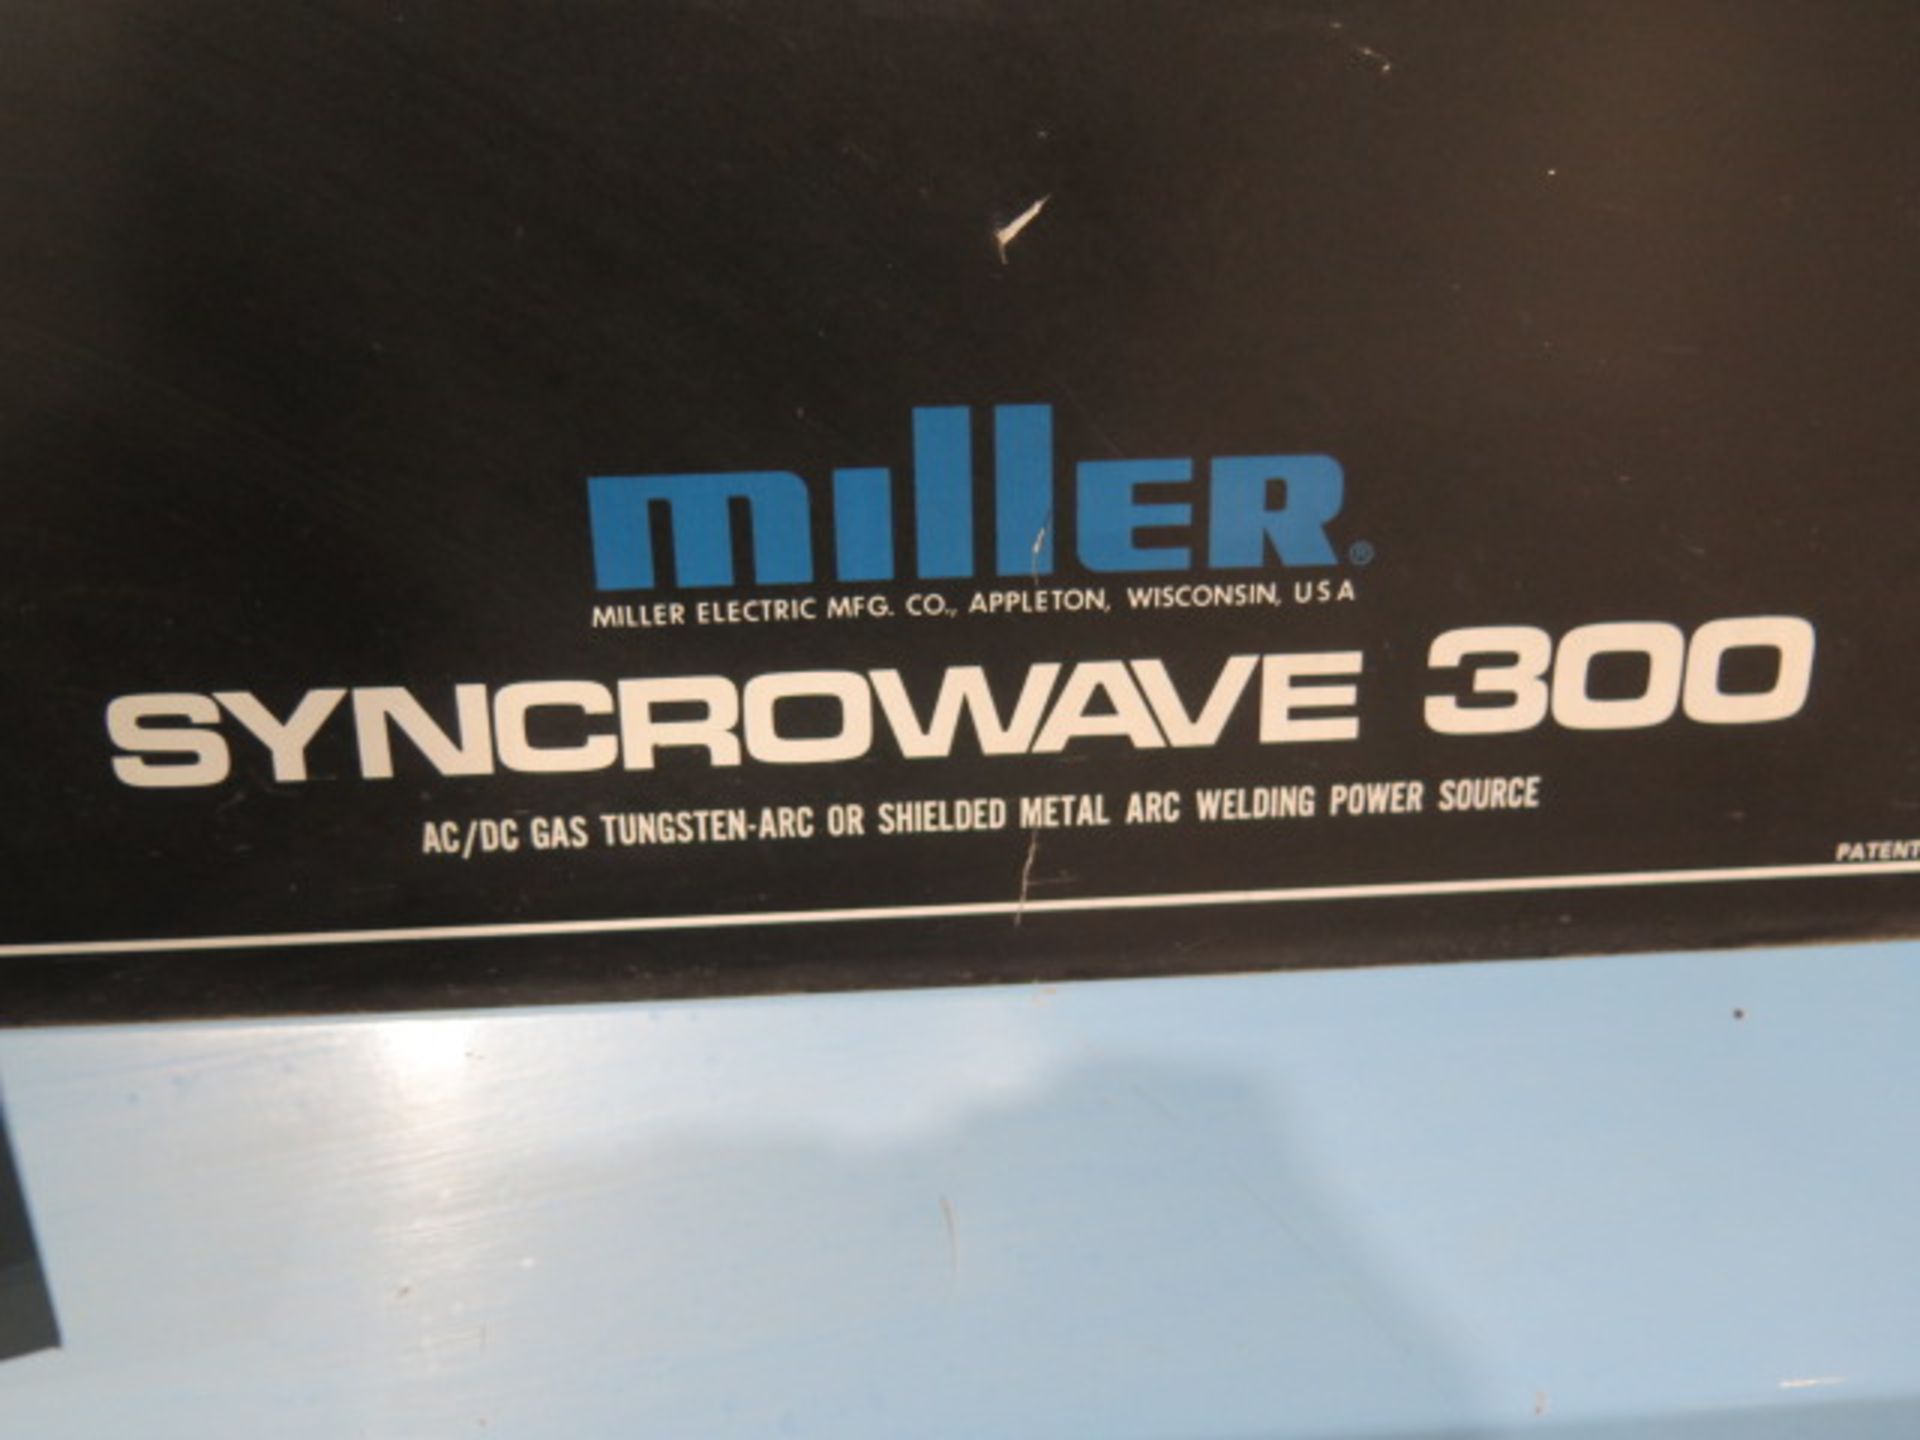 Miller Syncrowave 300 AC/DC Arc welding Power Source s/n JE768628 w/ Bernard Coller and Cart - Image 5 of 5